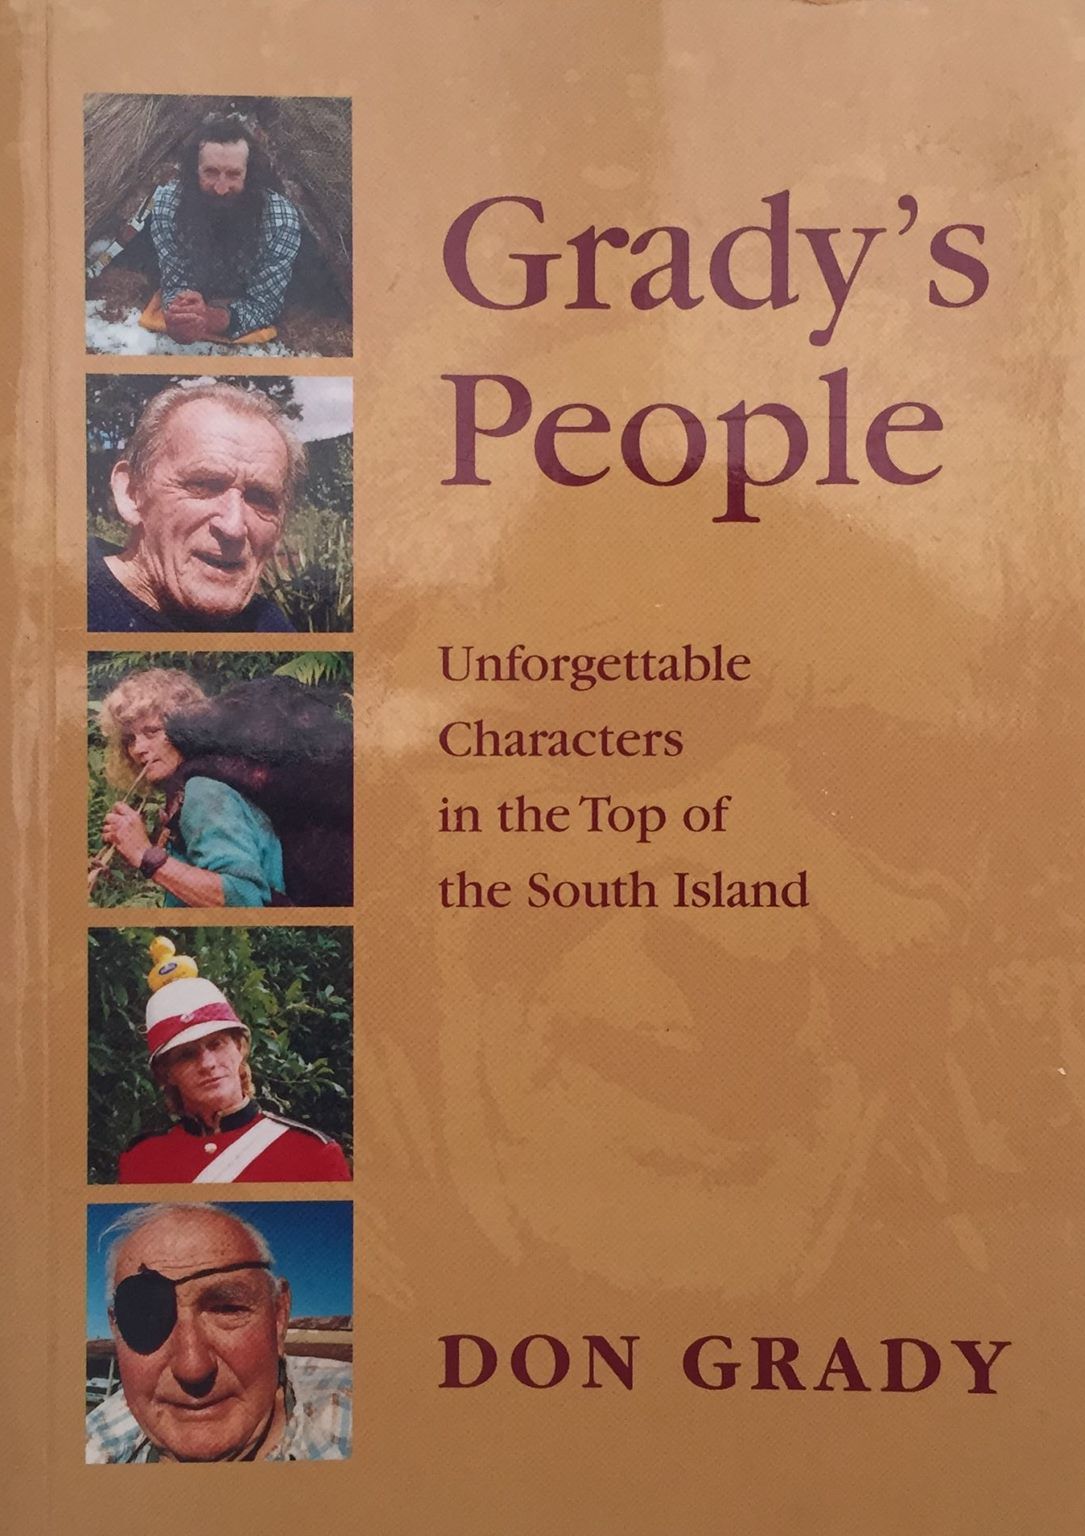 GRADY'S PEOPLE: Unforgettable Characters in the Top of the South Island